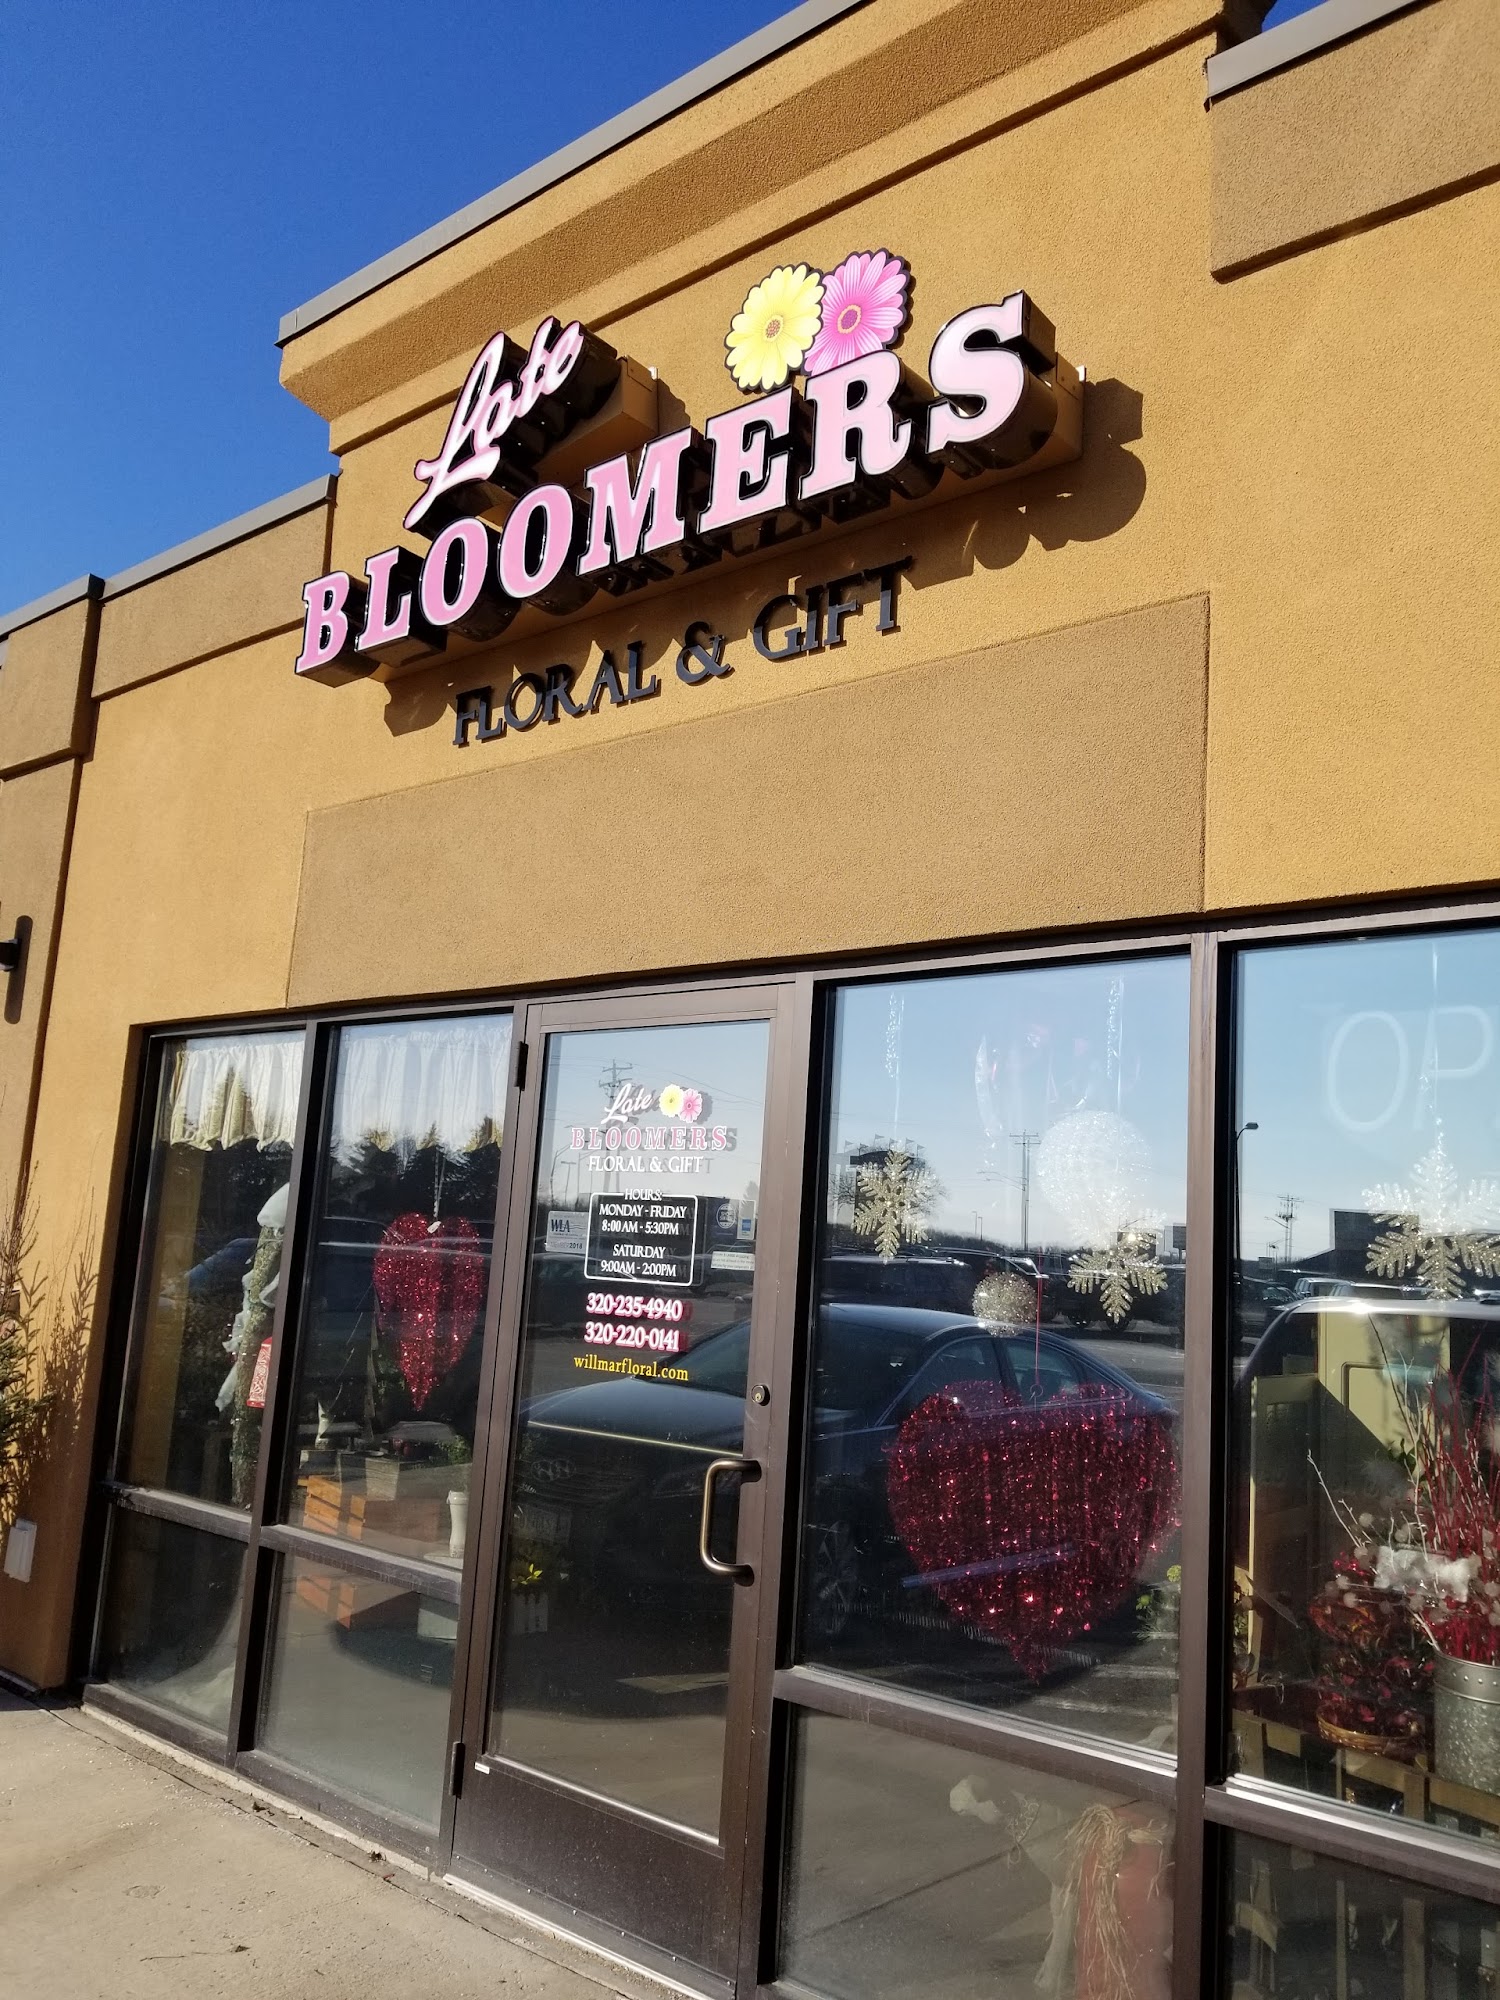 Late Bloomers Floral & Gift, LLC